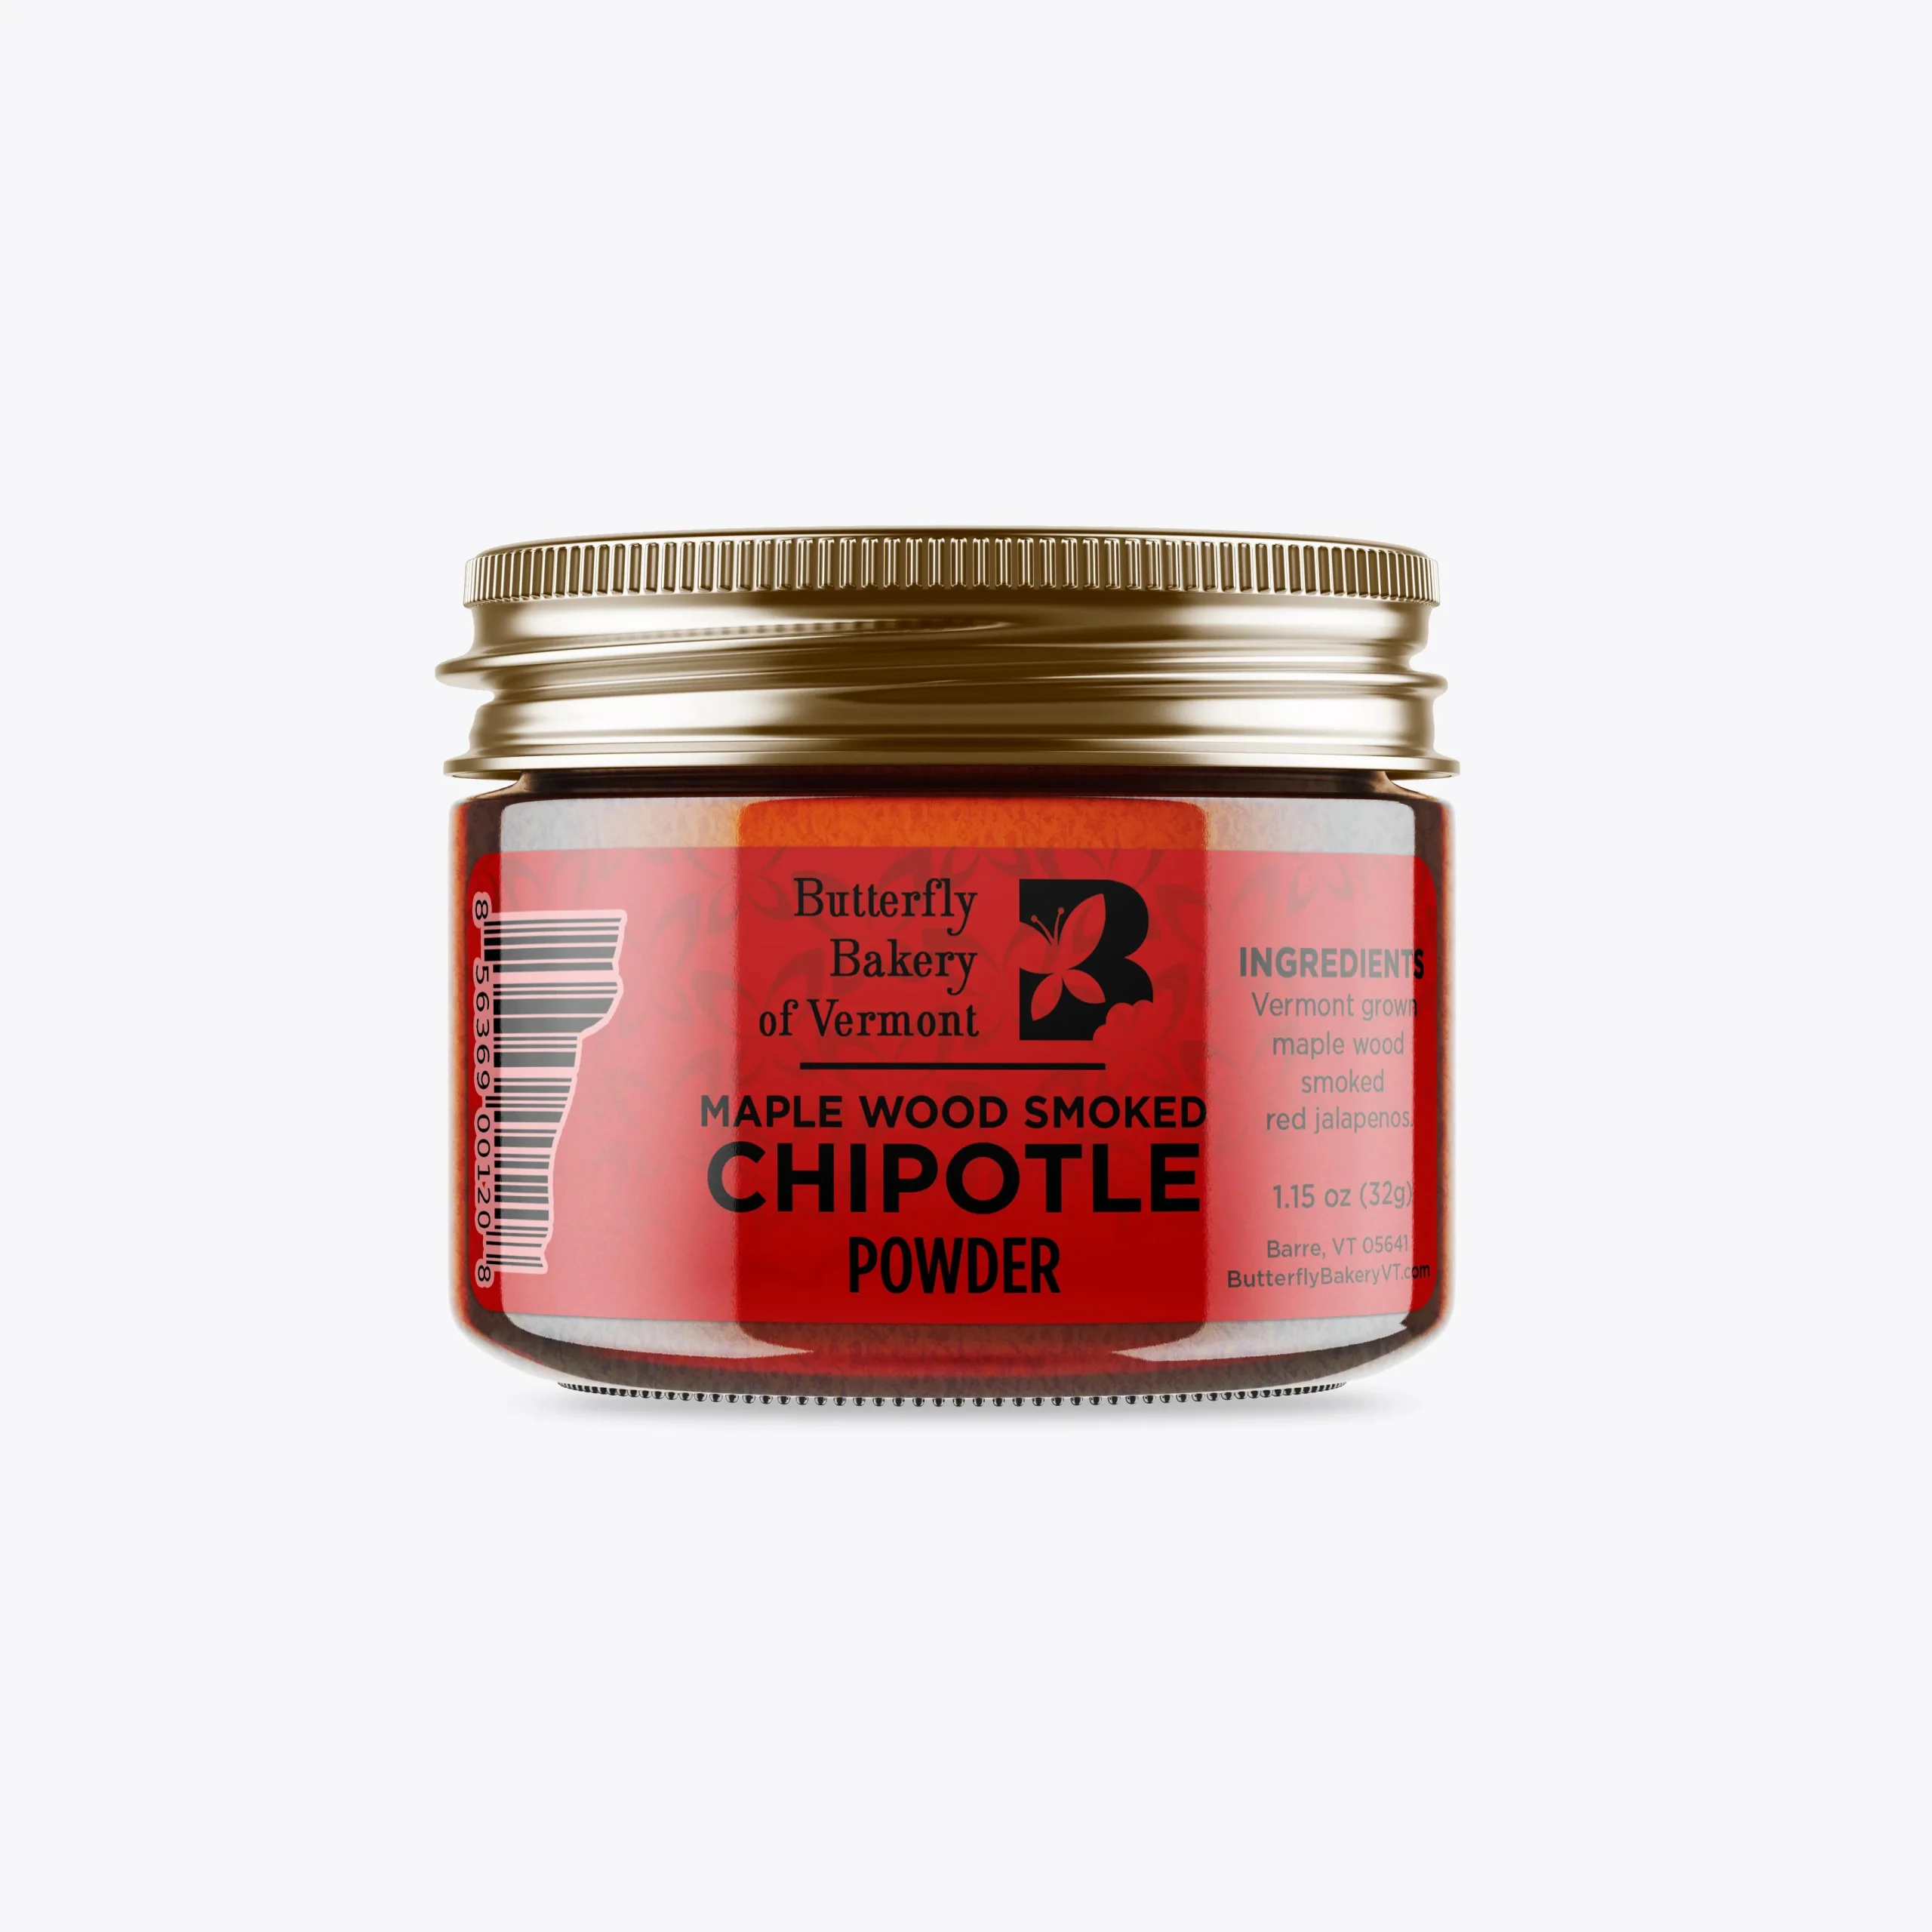 smoked chipotle powder - What is chipotle powder made of